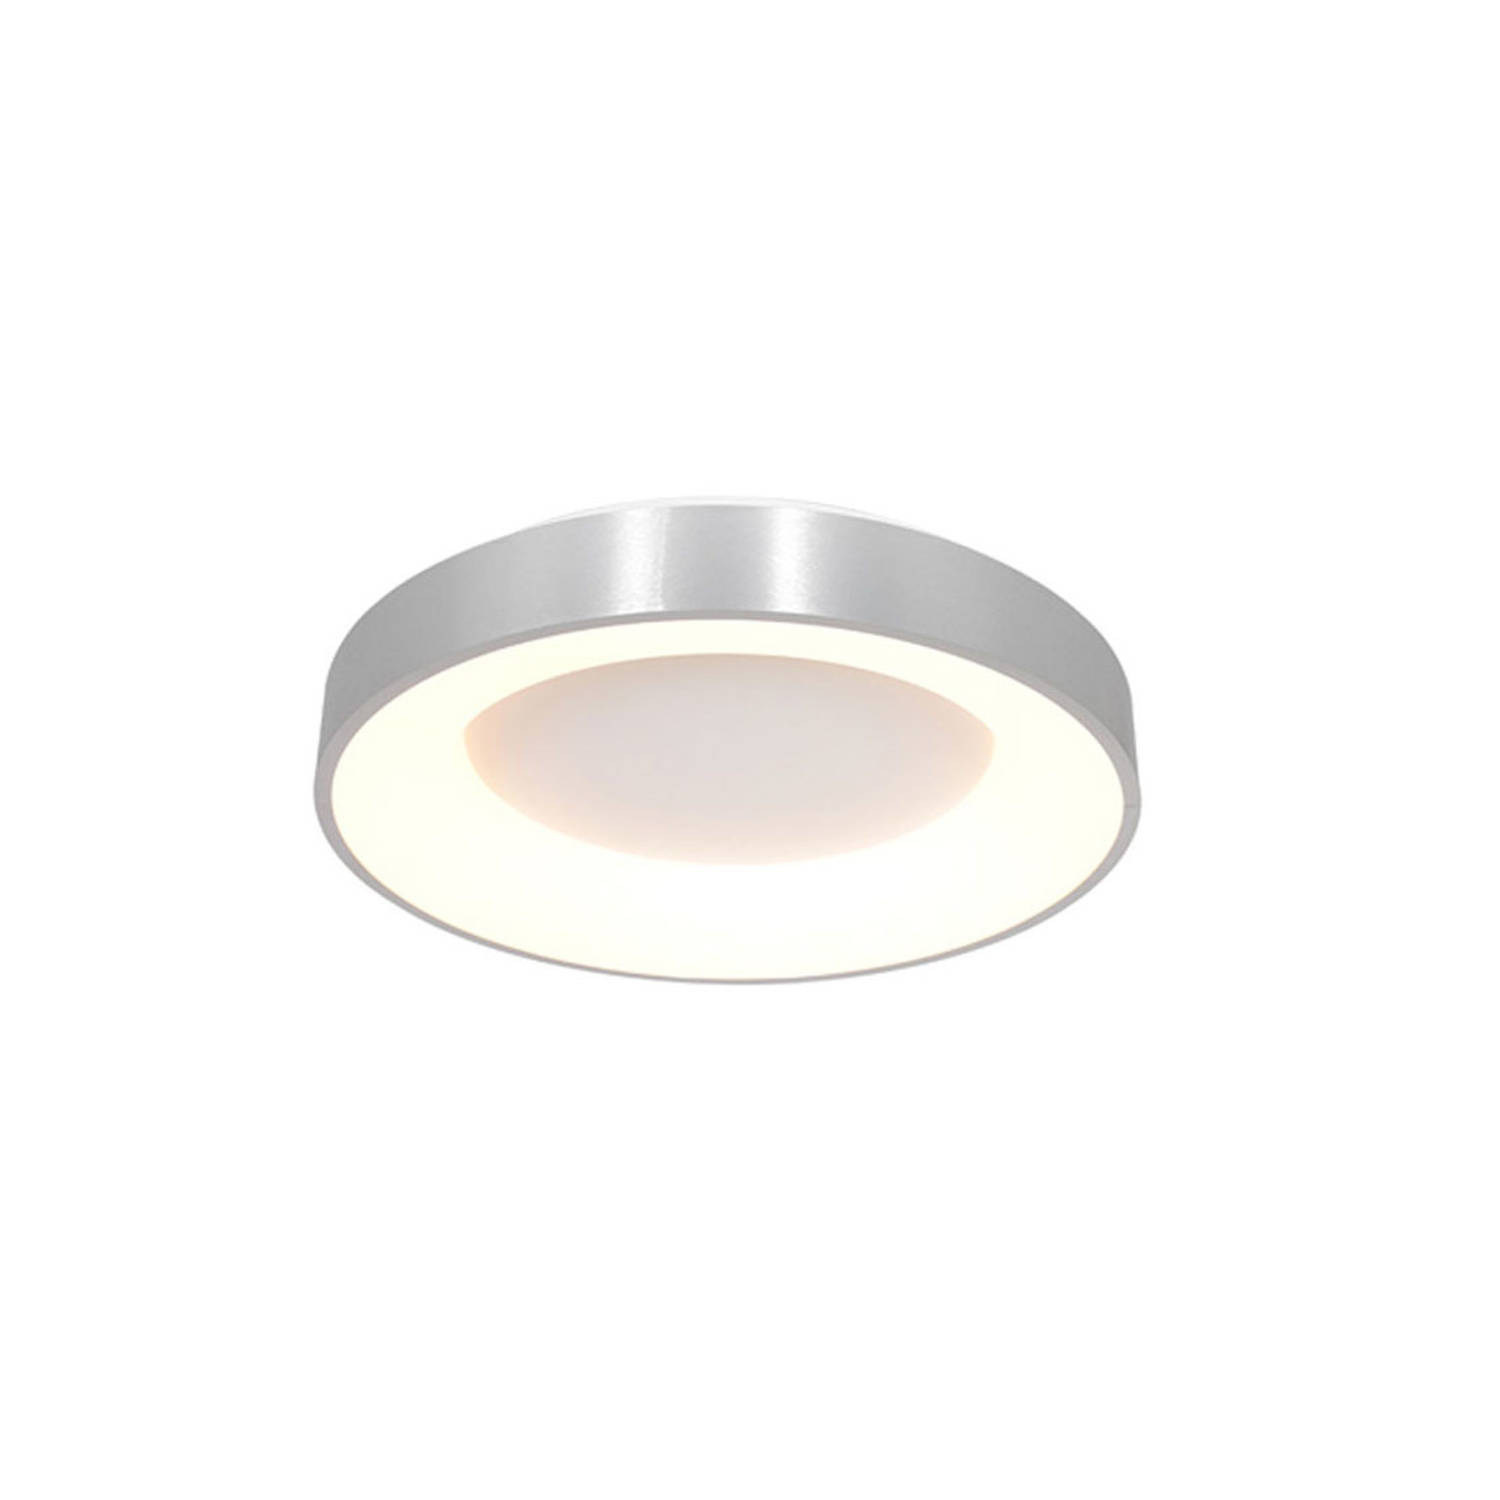 Steinhauer Plafondlamp ceiling and wall LED 3086zi zilver